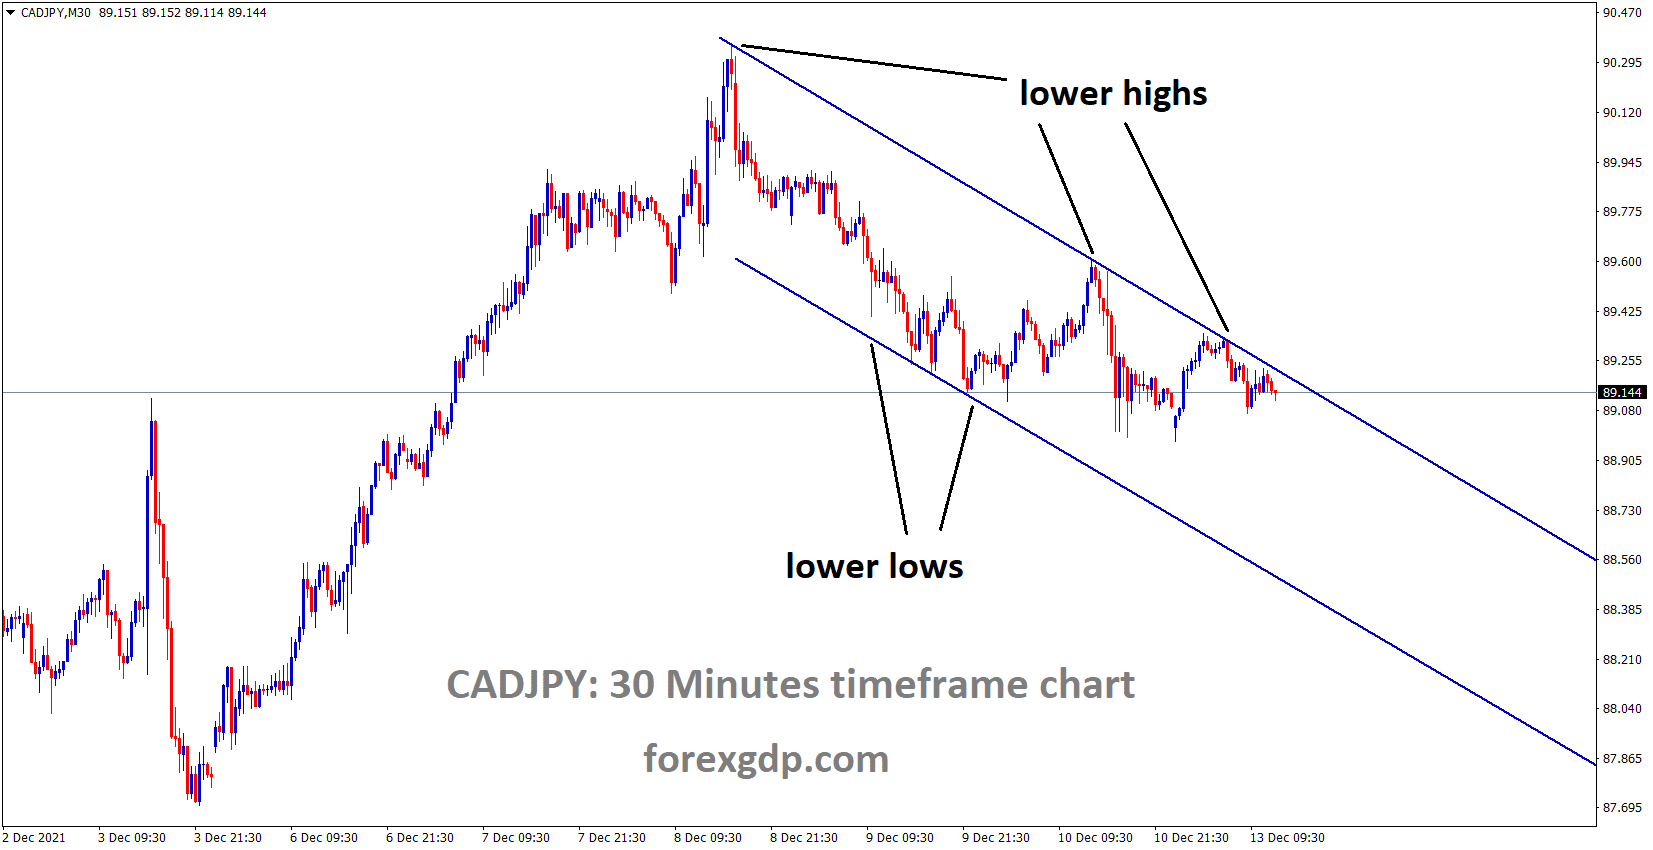 CADJPY is moving in the Descending channel and the market fell from the lower high area of the channel